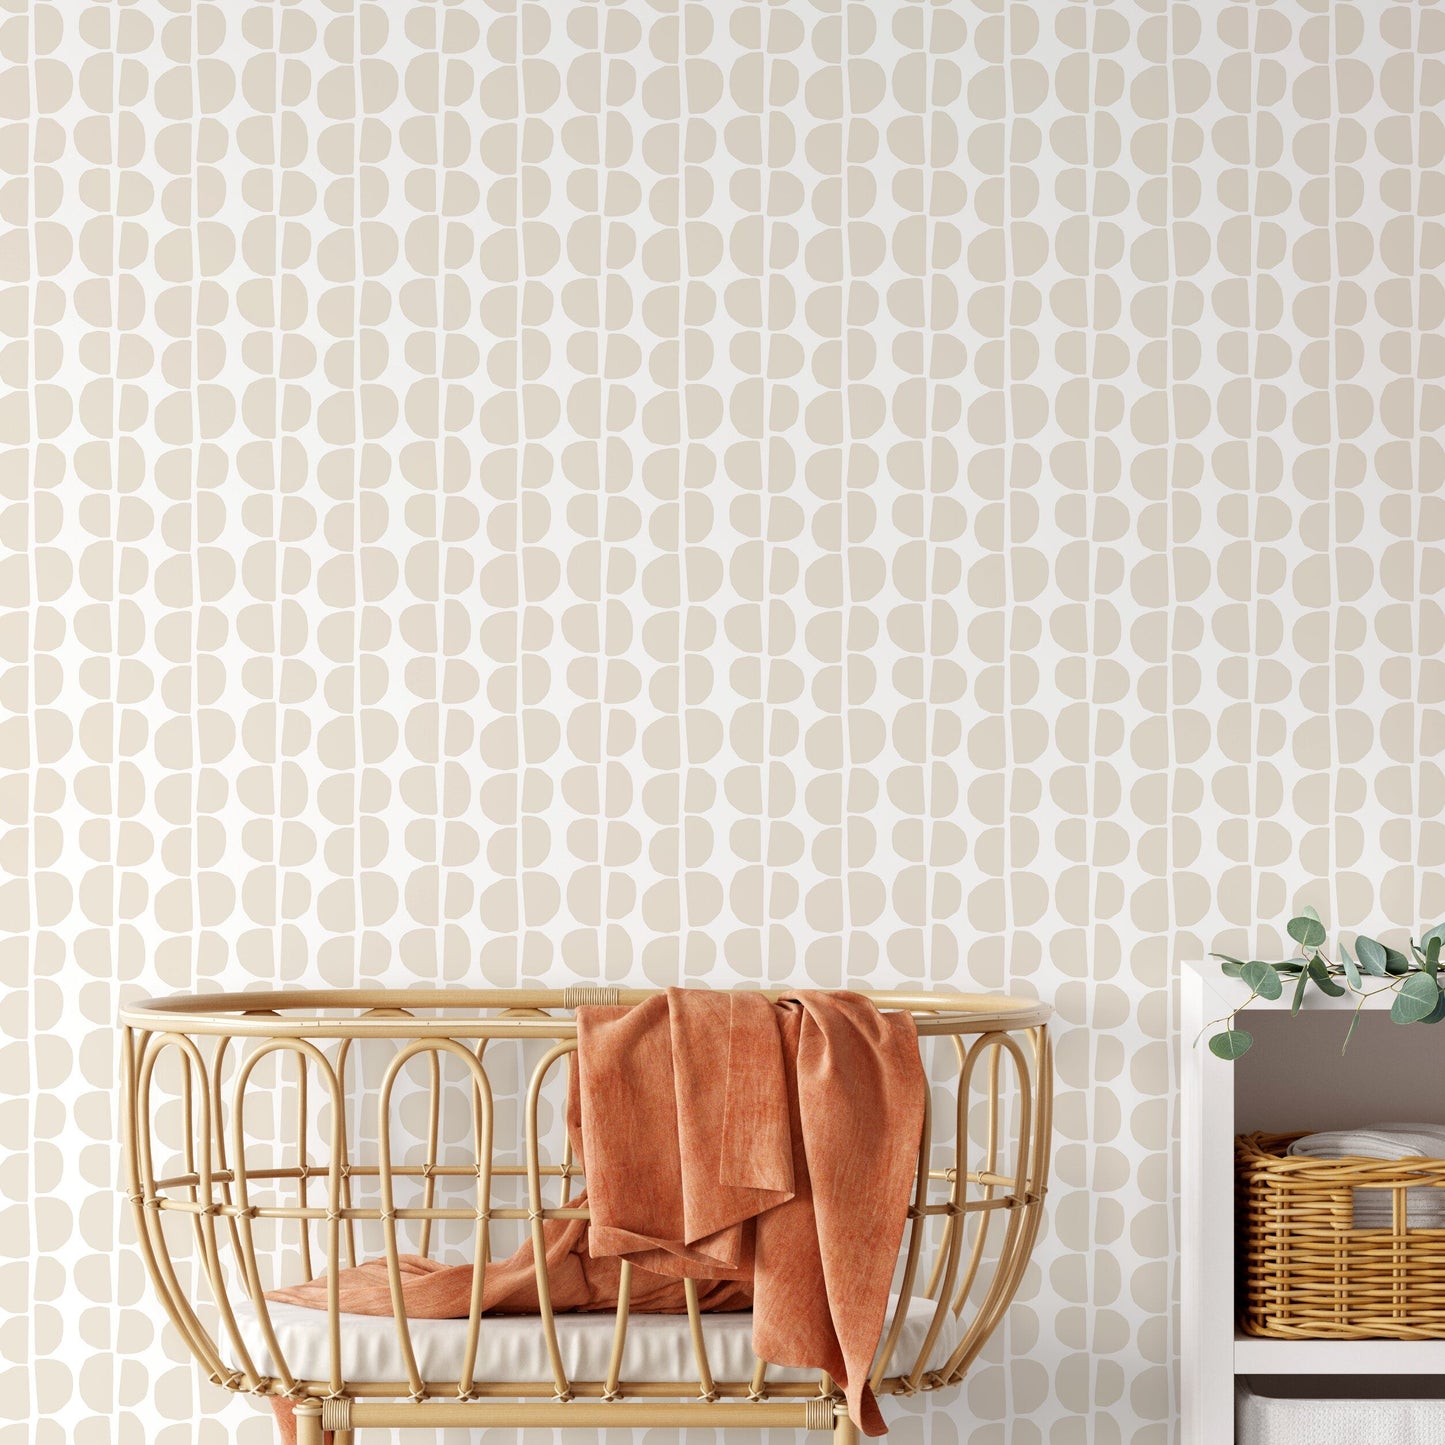 Peel and Stick Wallpaper Removable Wallpaper Contemporary Wall Mural Temporary Wallpaper Abstract Wallpaper - C221